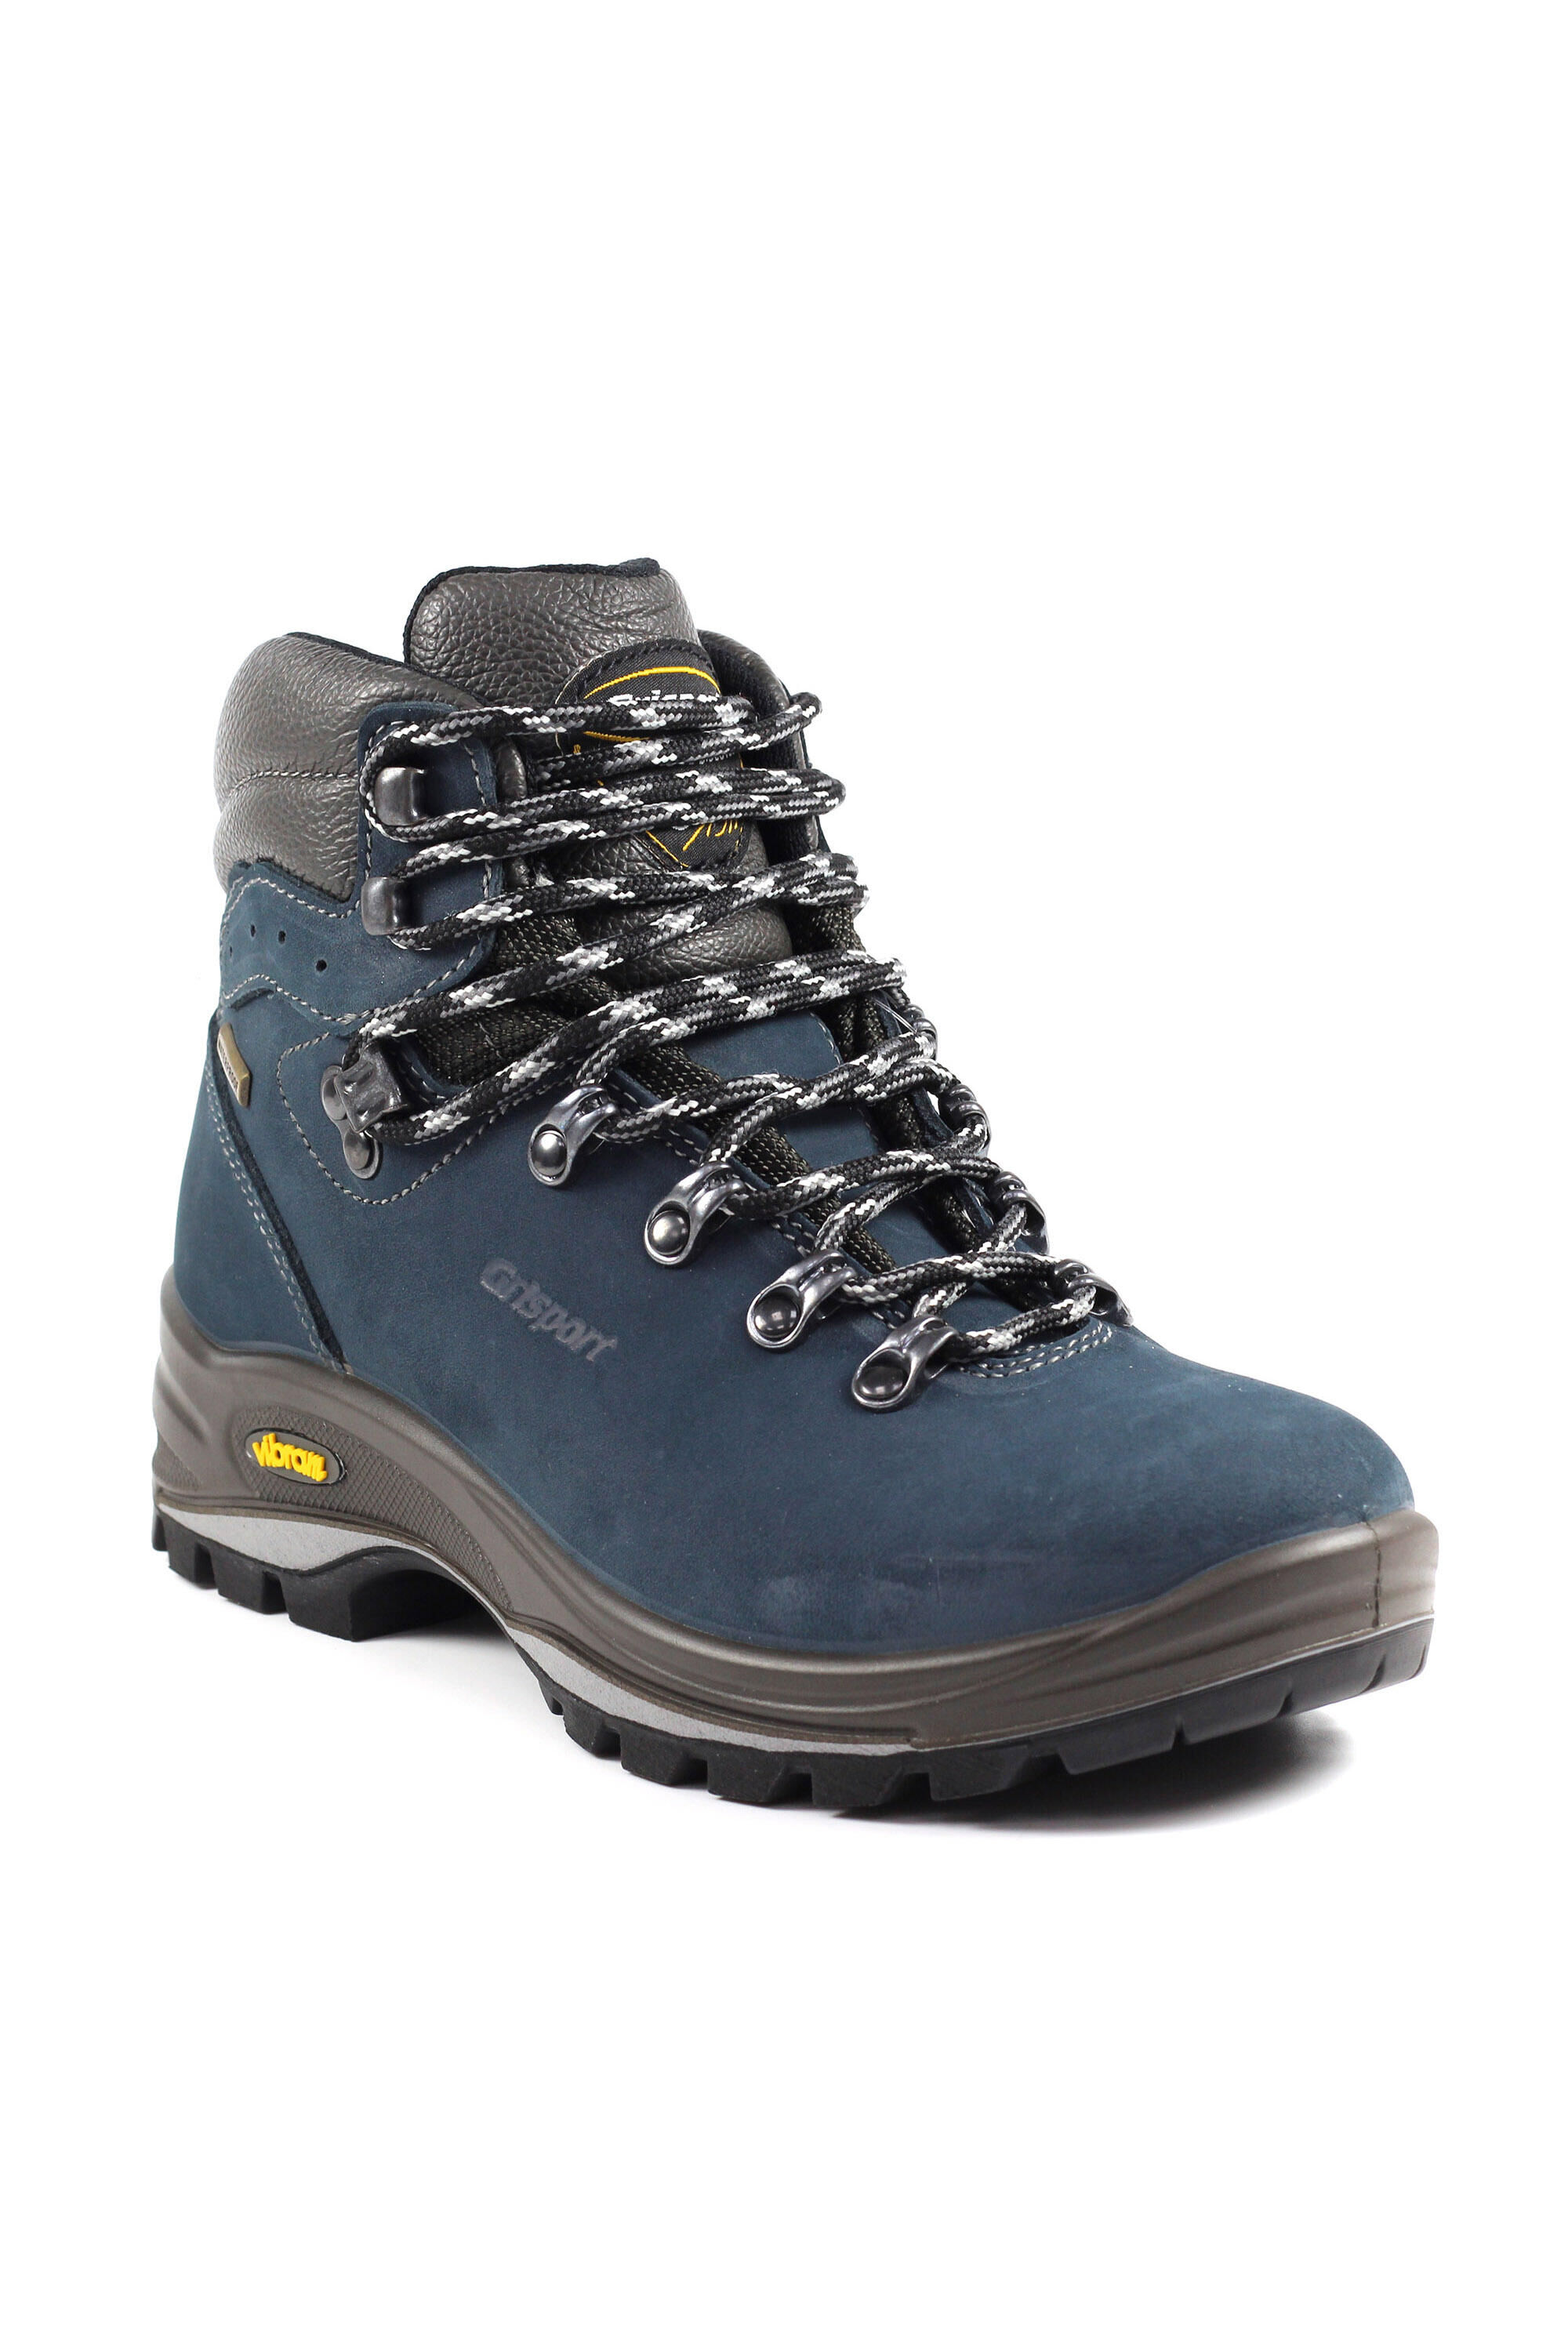 GRISPORT Lady Tempest Blue Waterproof Hiking Boot